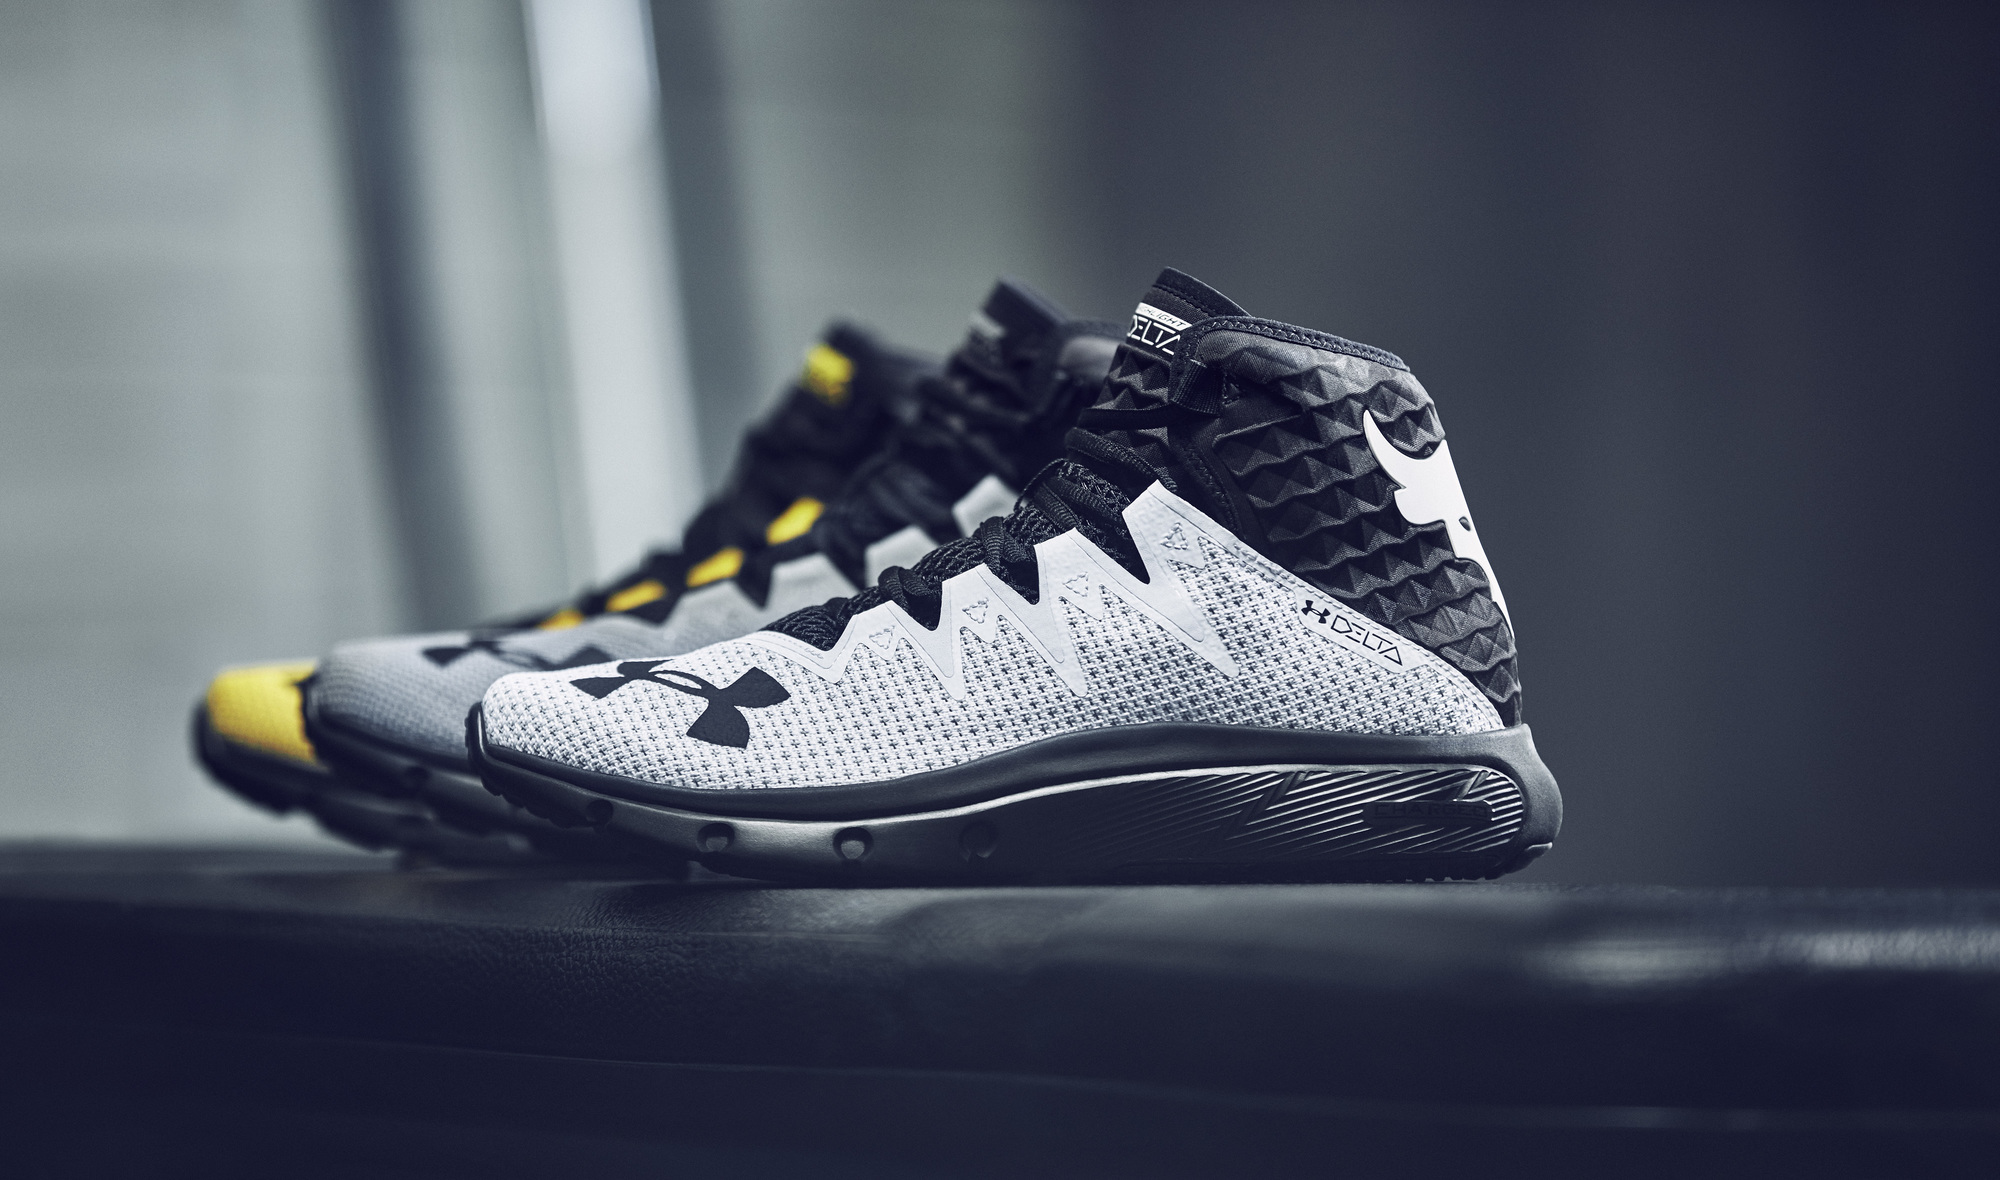 Dwayne Johnson and Under Armour Debut Three New Project Rock